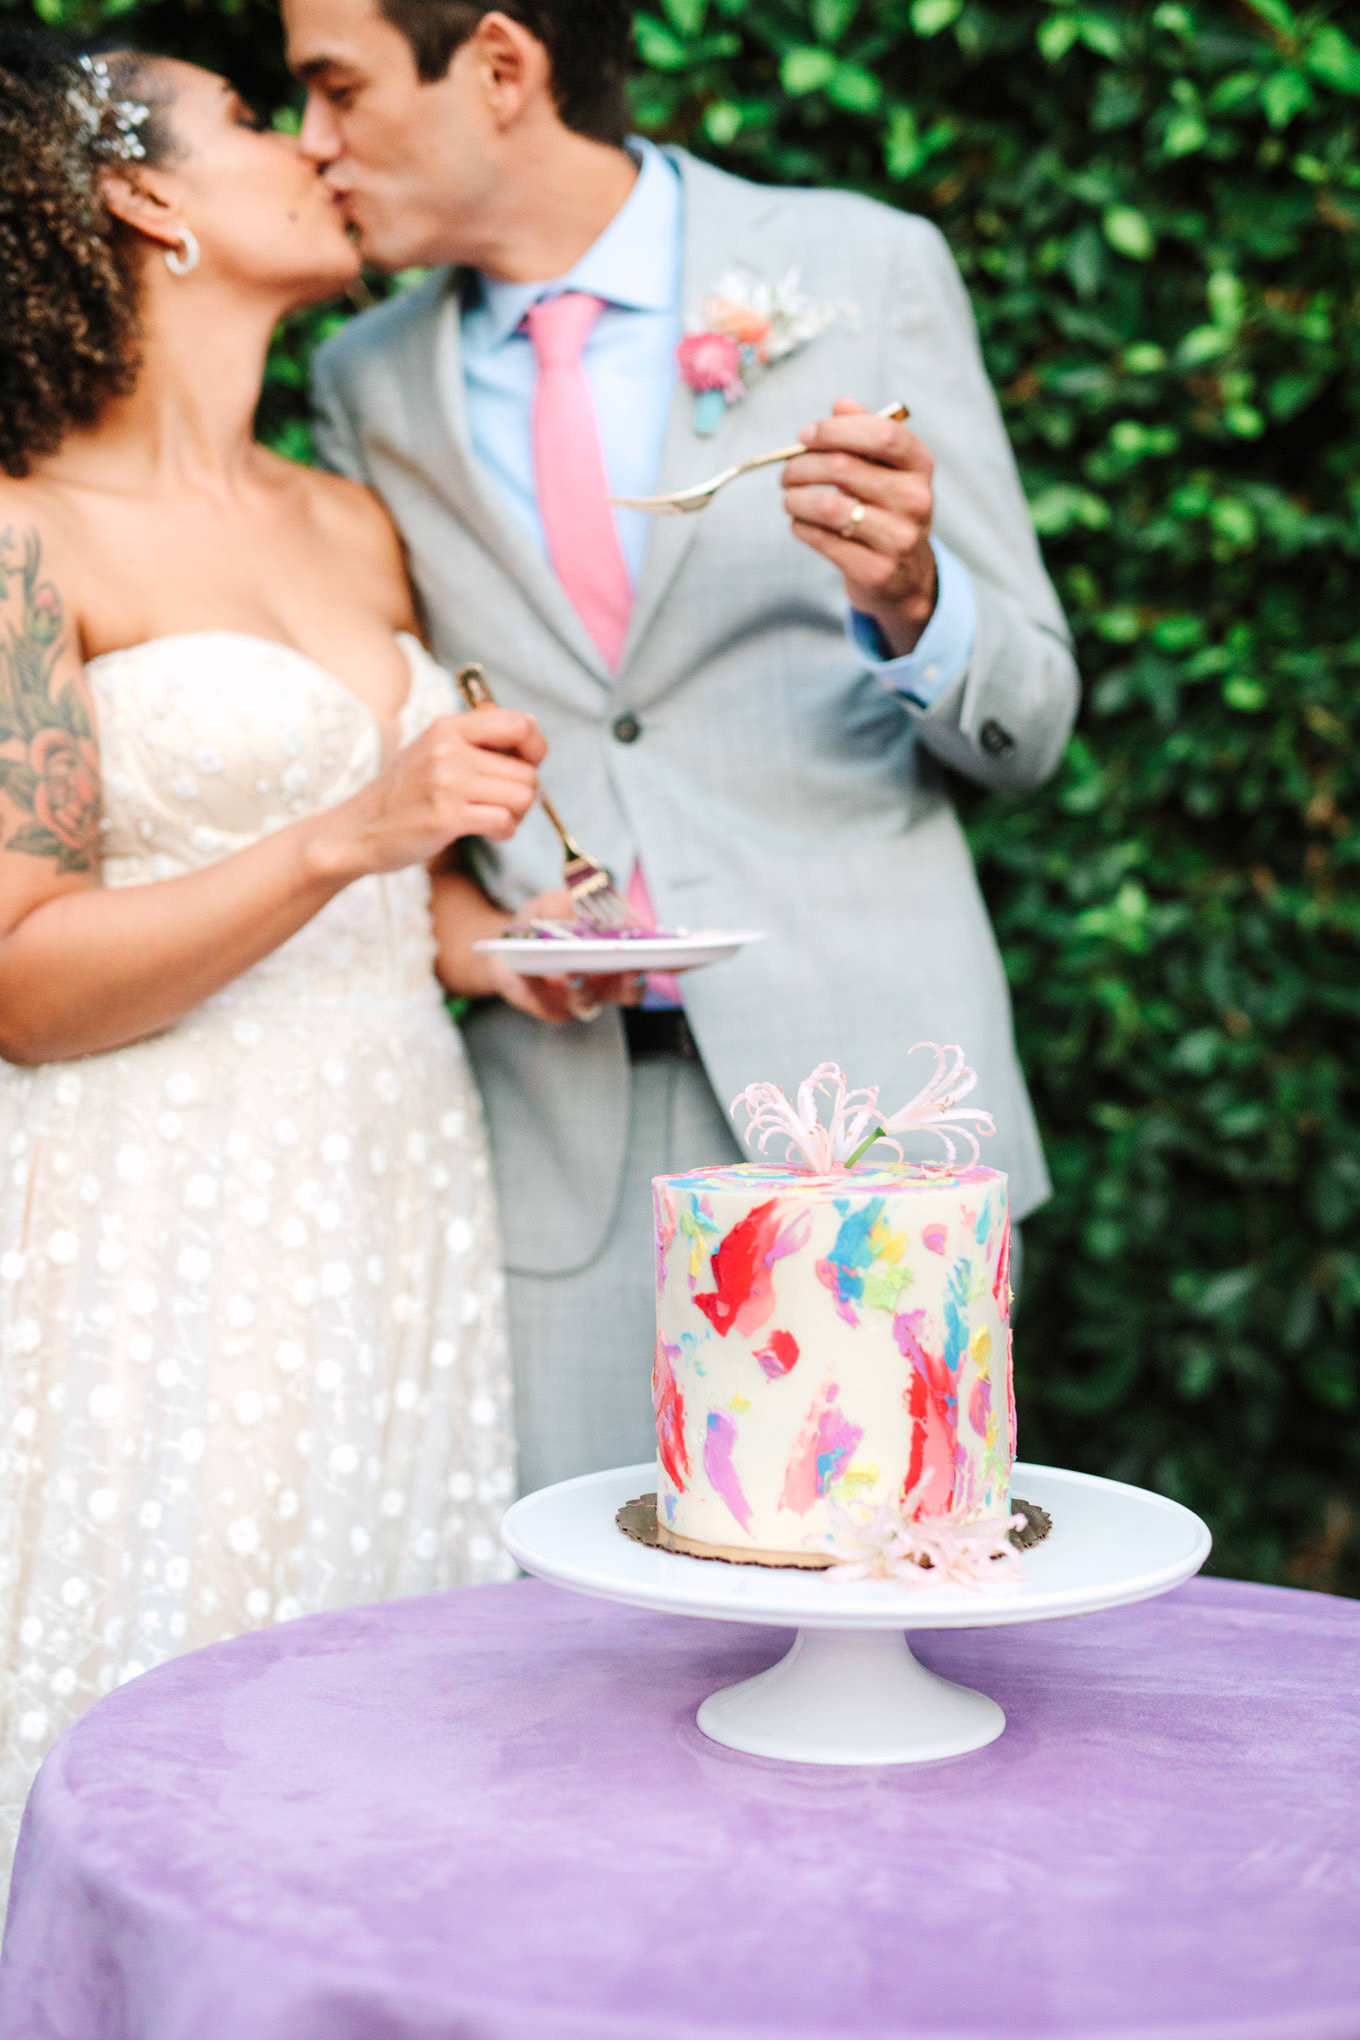 Bride and groom cutting watercolor cake Los Angeles Chinatown engagement session | Engagement, elopement, and wedding photography roundup of Mary Costa’s favorite images from 2020 | Colorful and elevated photography for fun-loving couples in Southern California | #2020wedding #elopement #weddingphoto #weddingphotography #microwedding   Source: Mary Costa Photography | Los Angeles